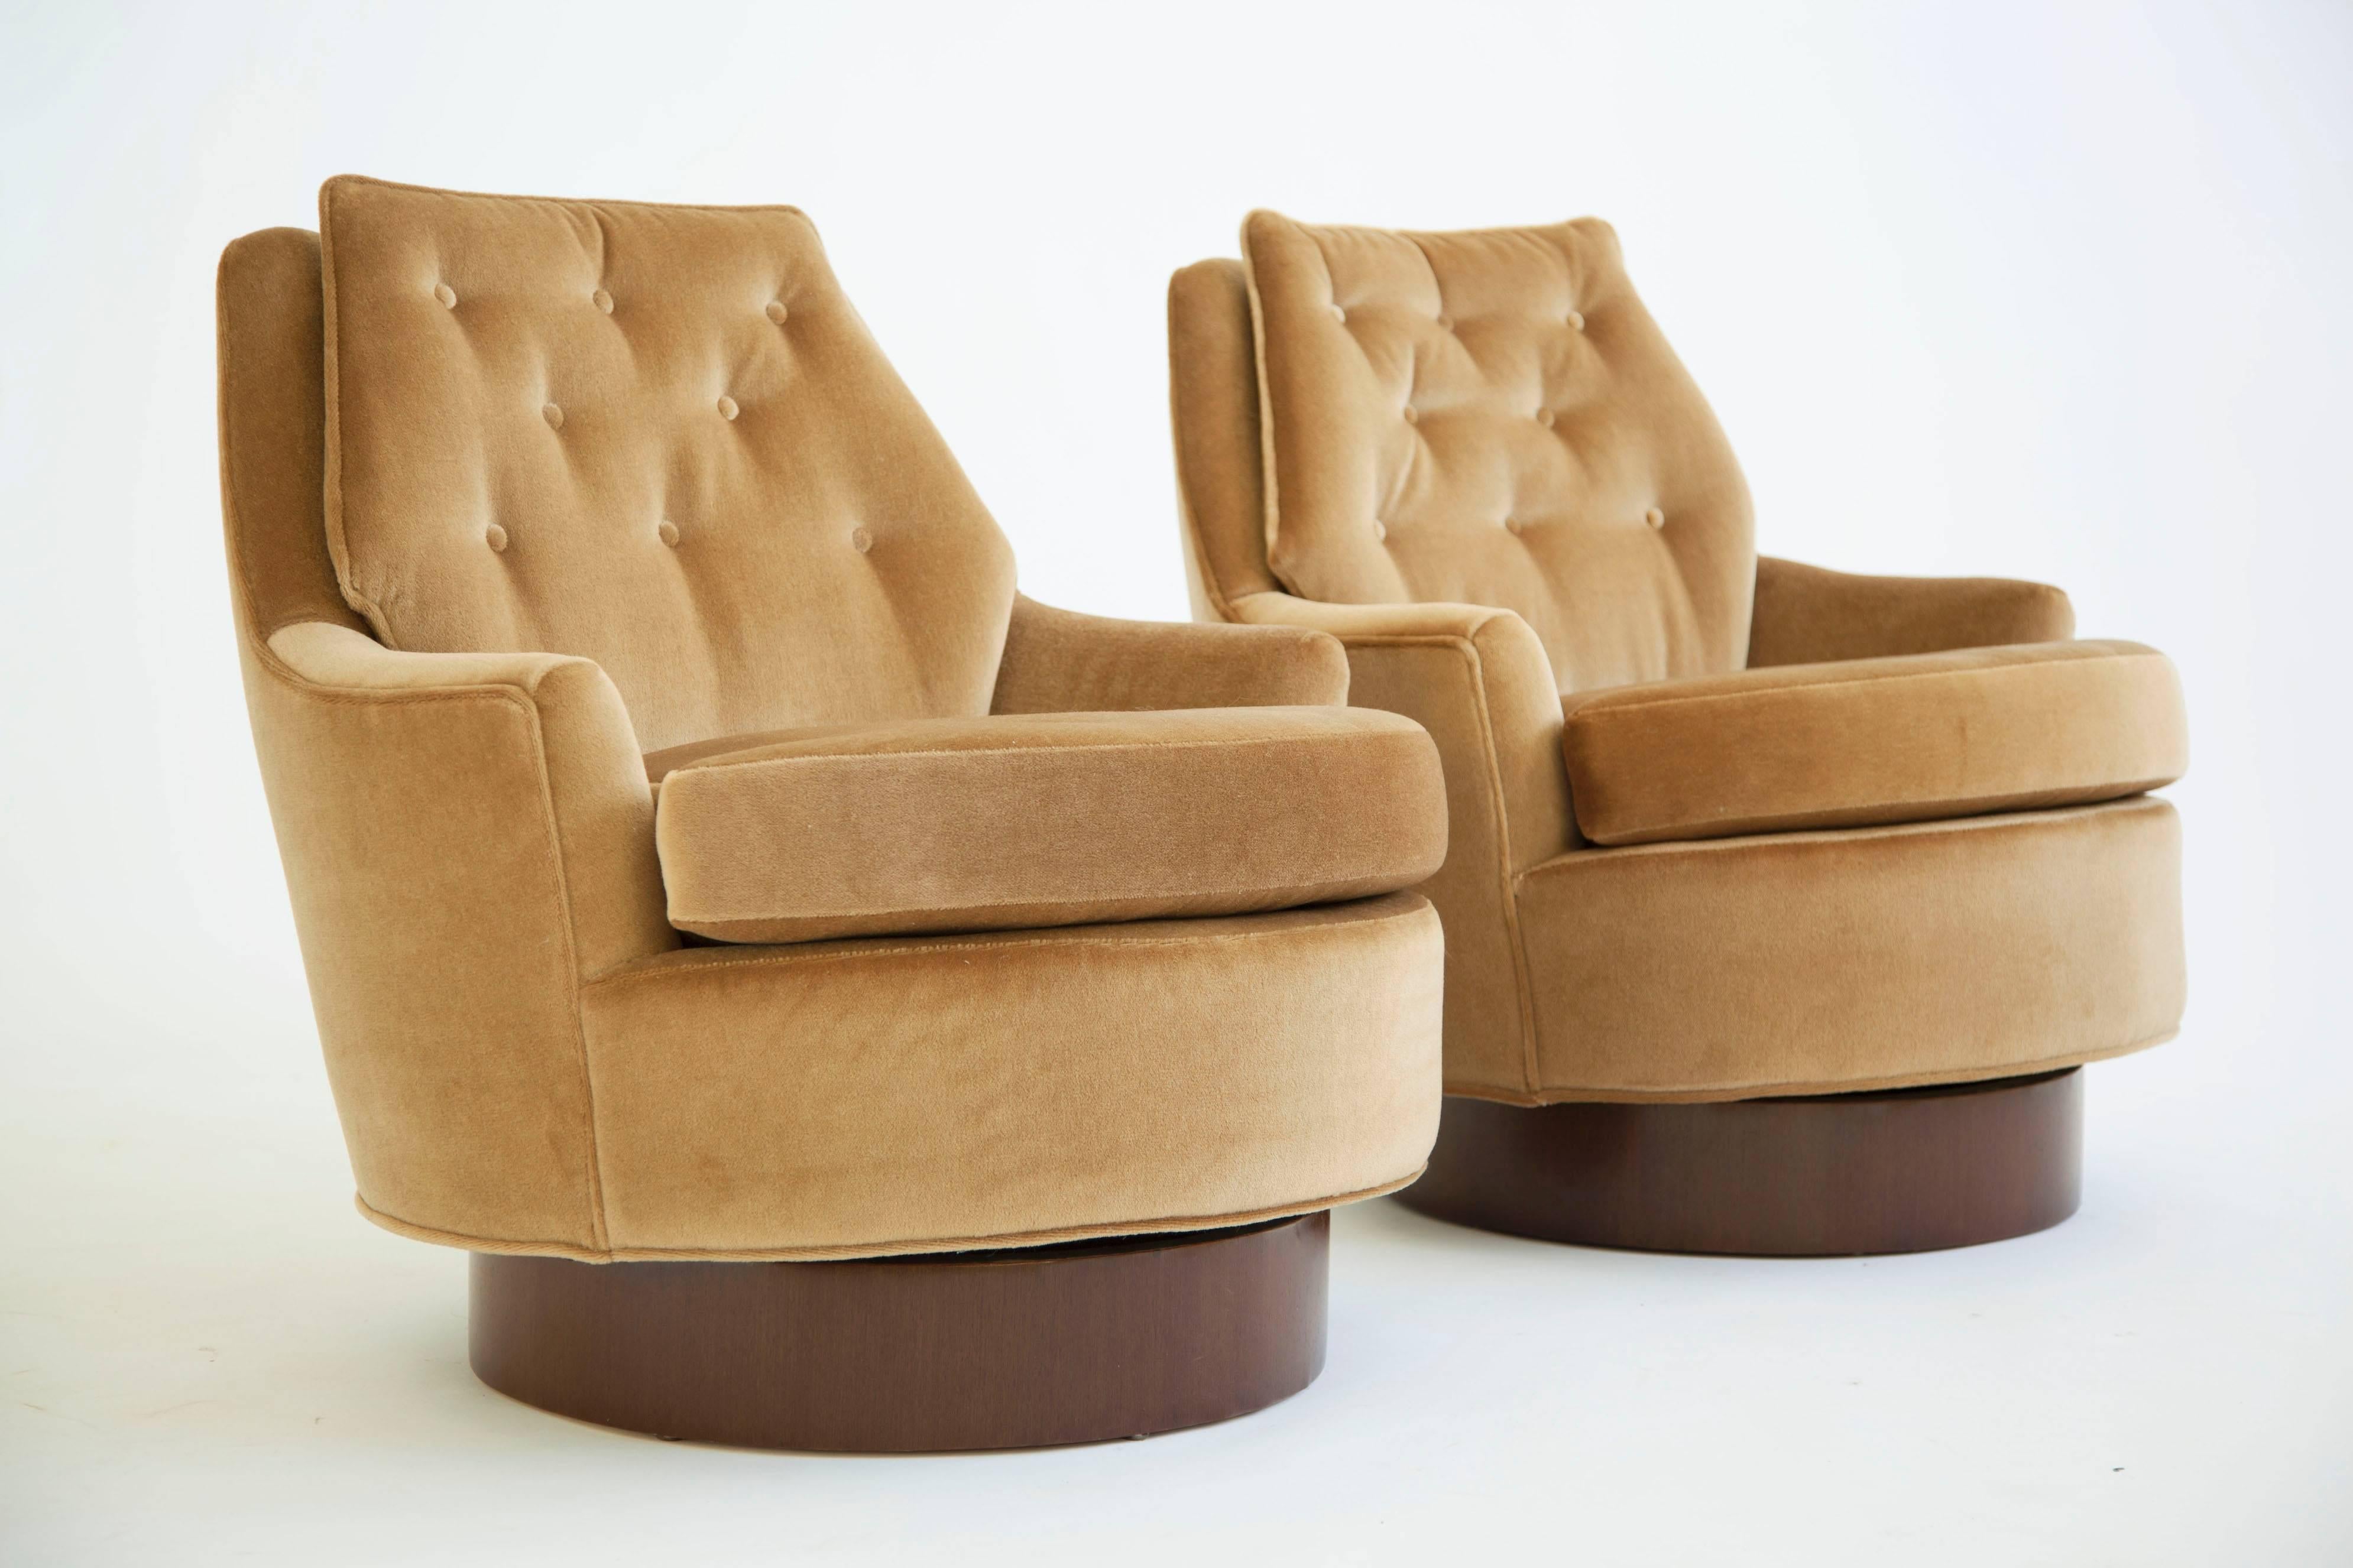 Milo Baughman for Thayer Coggin swivel-tilt lounge chairs.
Reupholstered with Mohair.